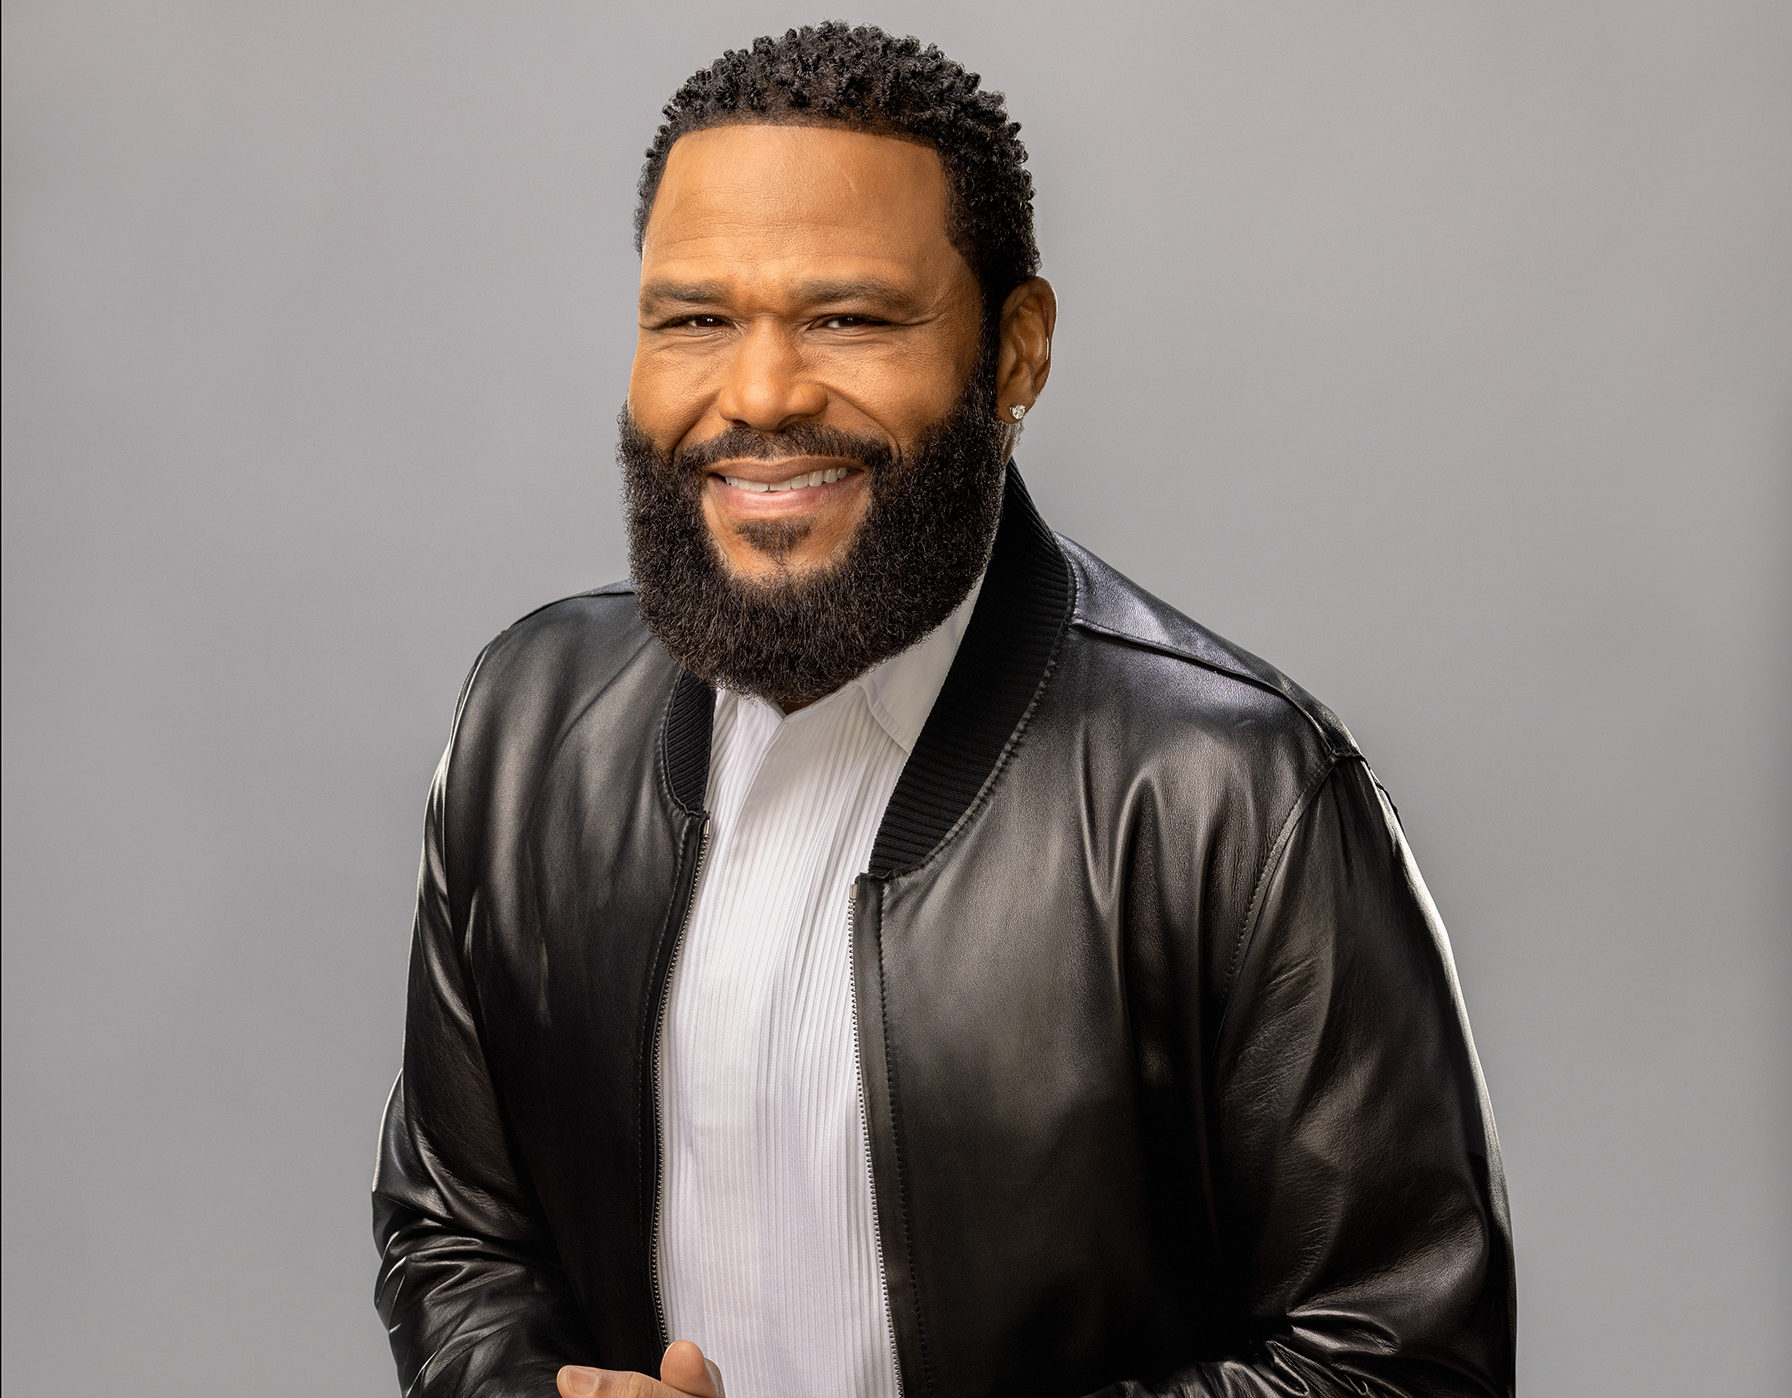 #We Are Family: Anthony Anderson and Mama Doris Replace Jamie & Corinne Foxx as Hosts of New FOX Series (Watch)